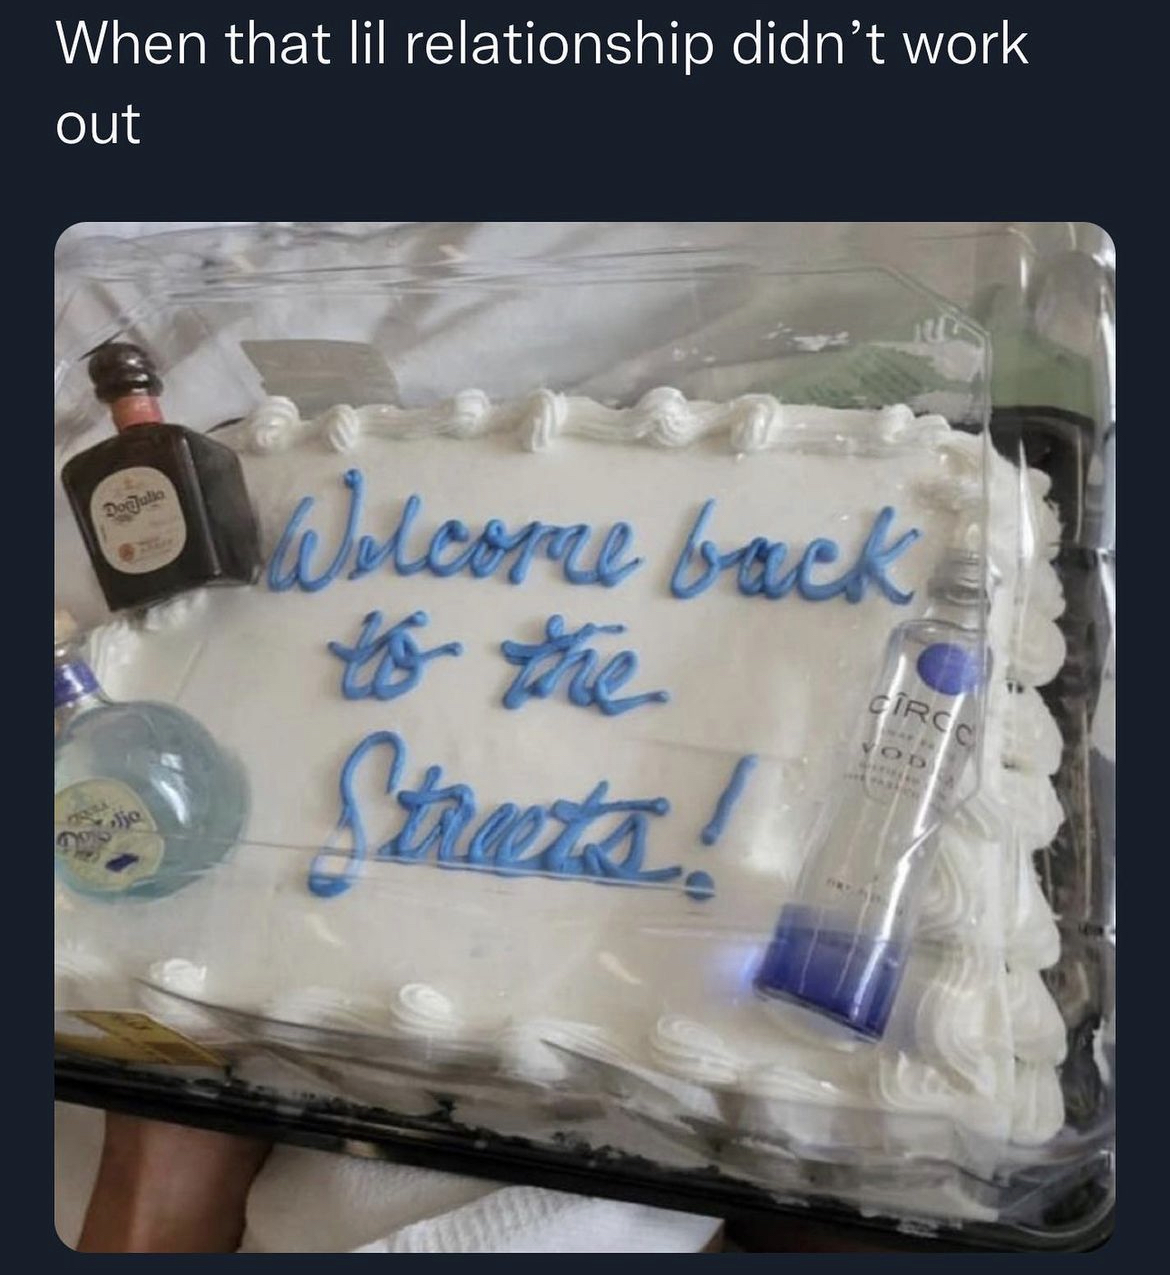 Hoodville memes and captions - welcome back to the streets cake - When that lil relationship didn't work out Welcome back Streets! Circ